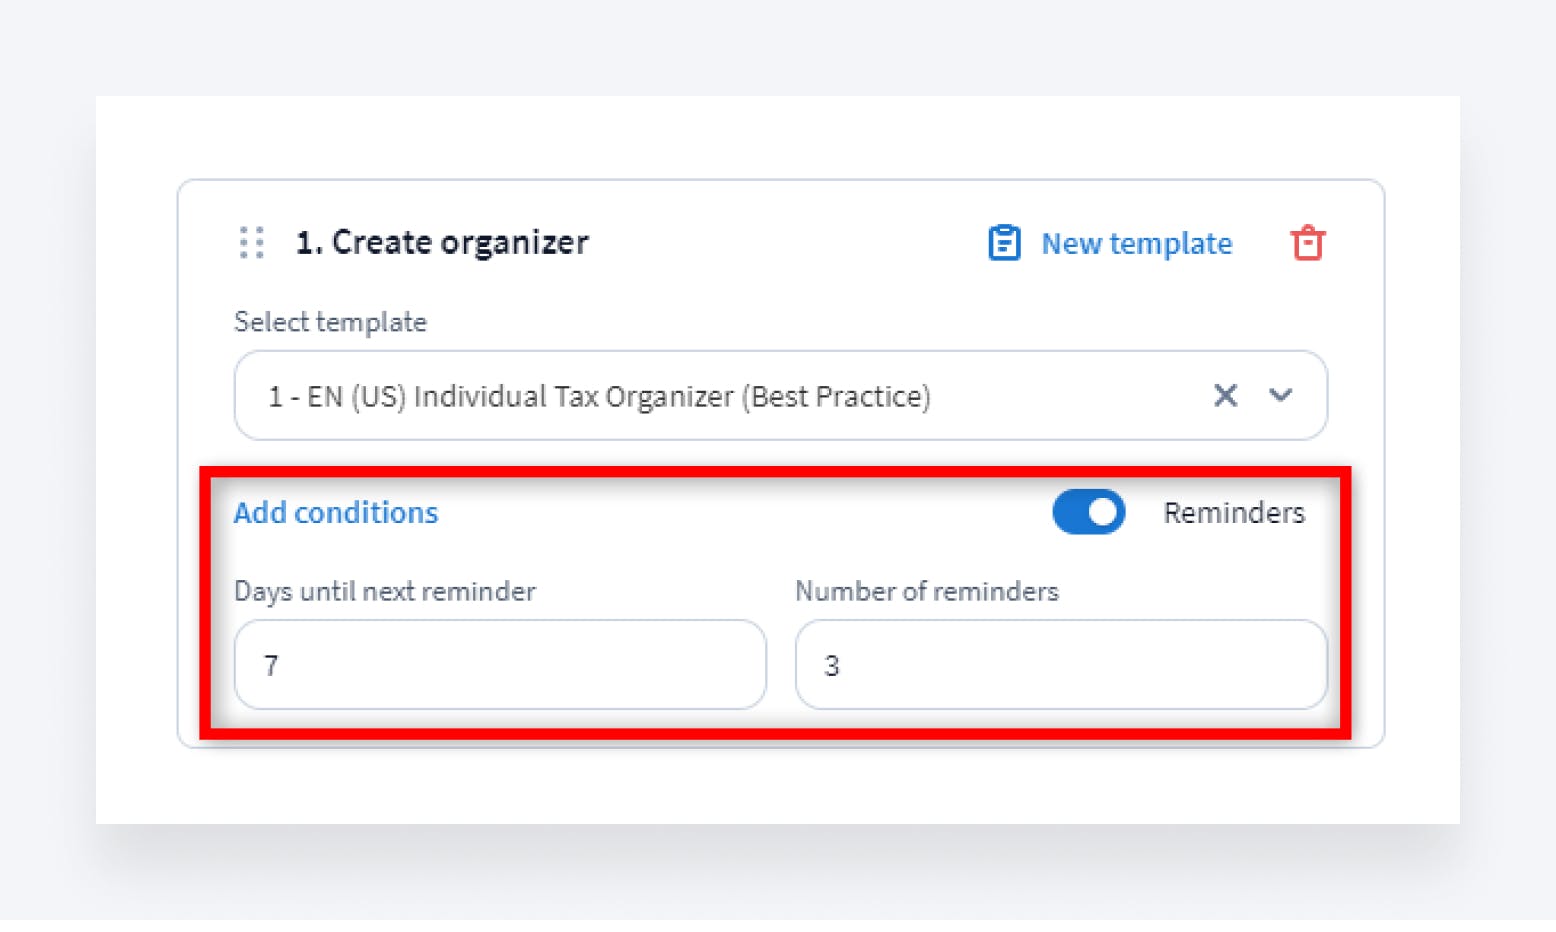 A “create organizer” screen with a template selected, reminders turned on and conditions displayed